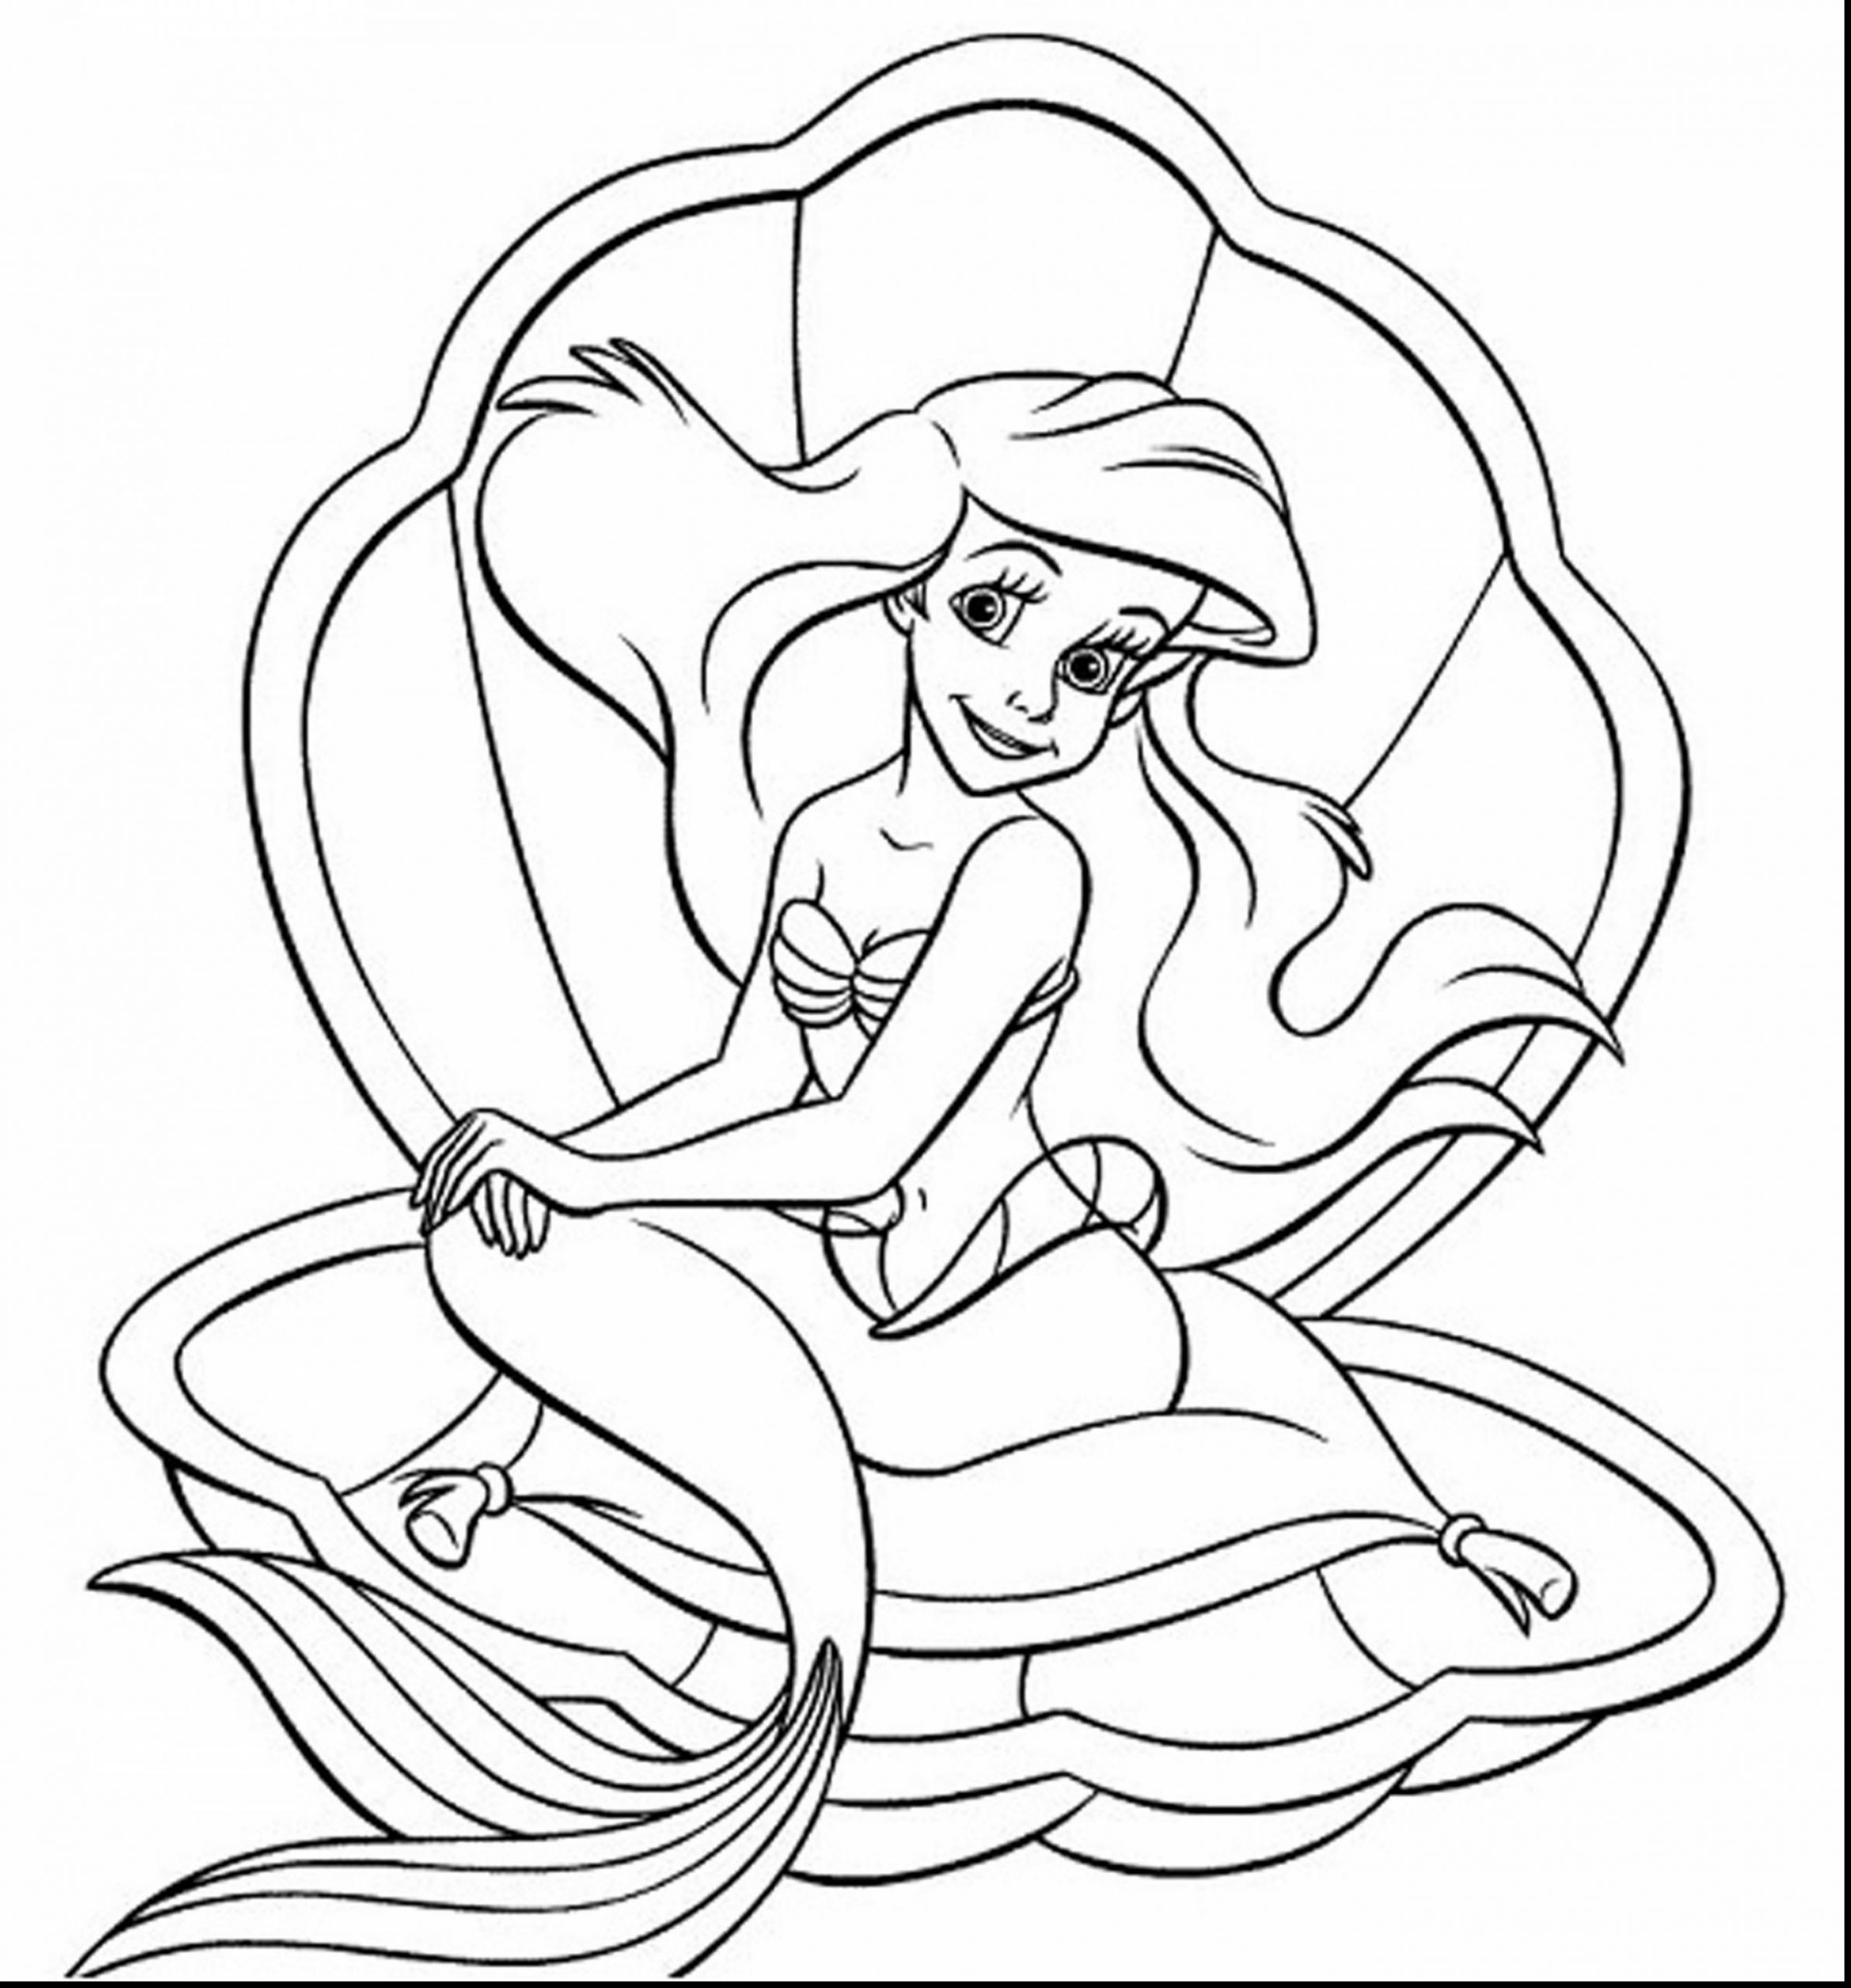 Baby Princesses Coloring Pages
 Baby Ariel Coloring Pages at GetColorings